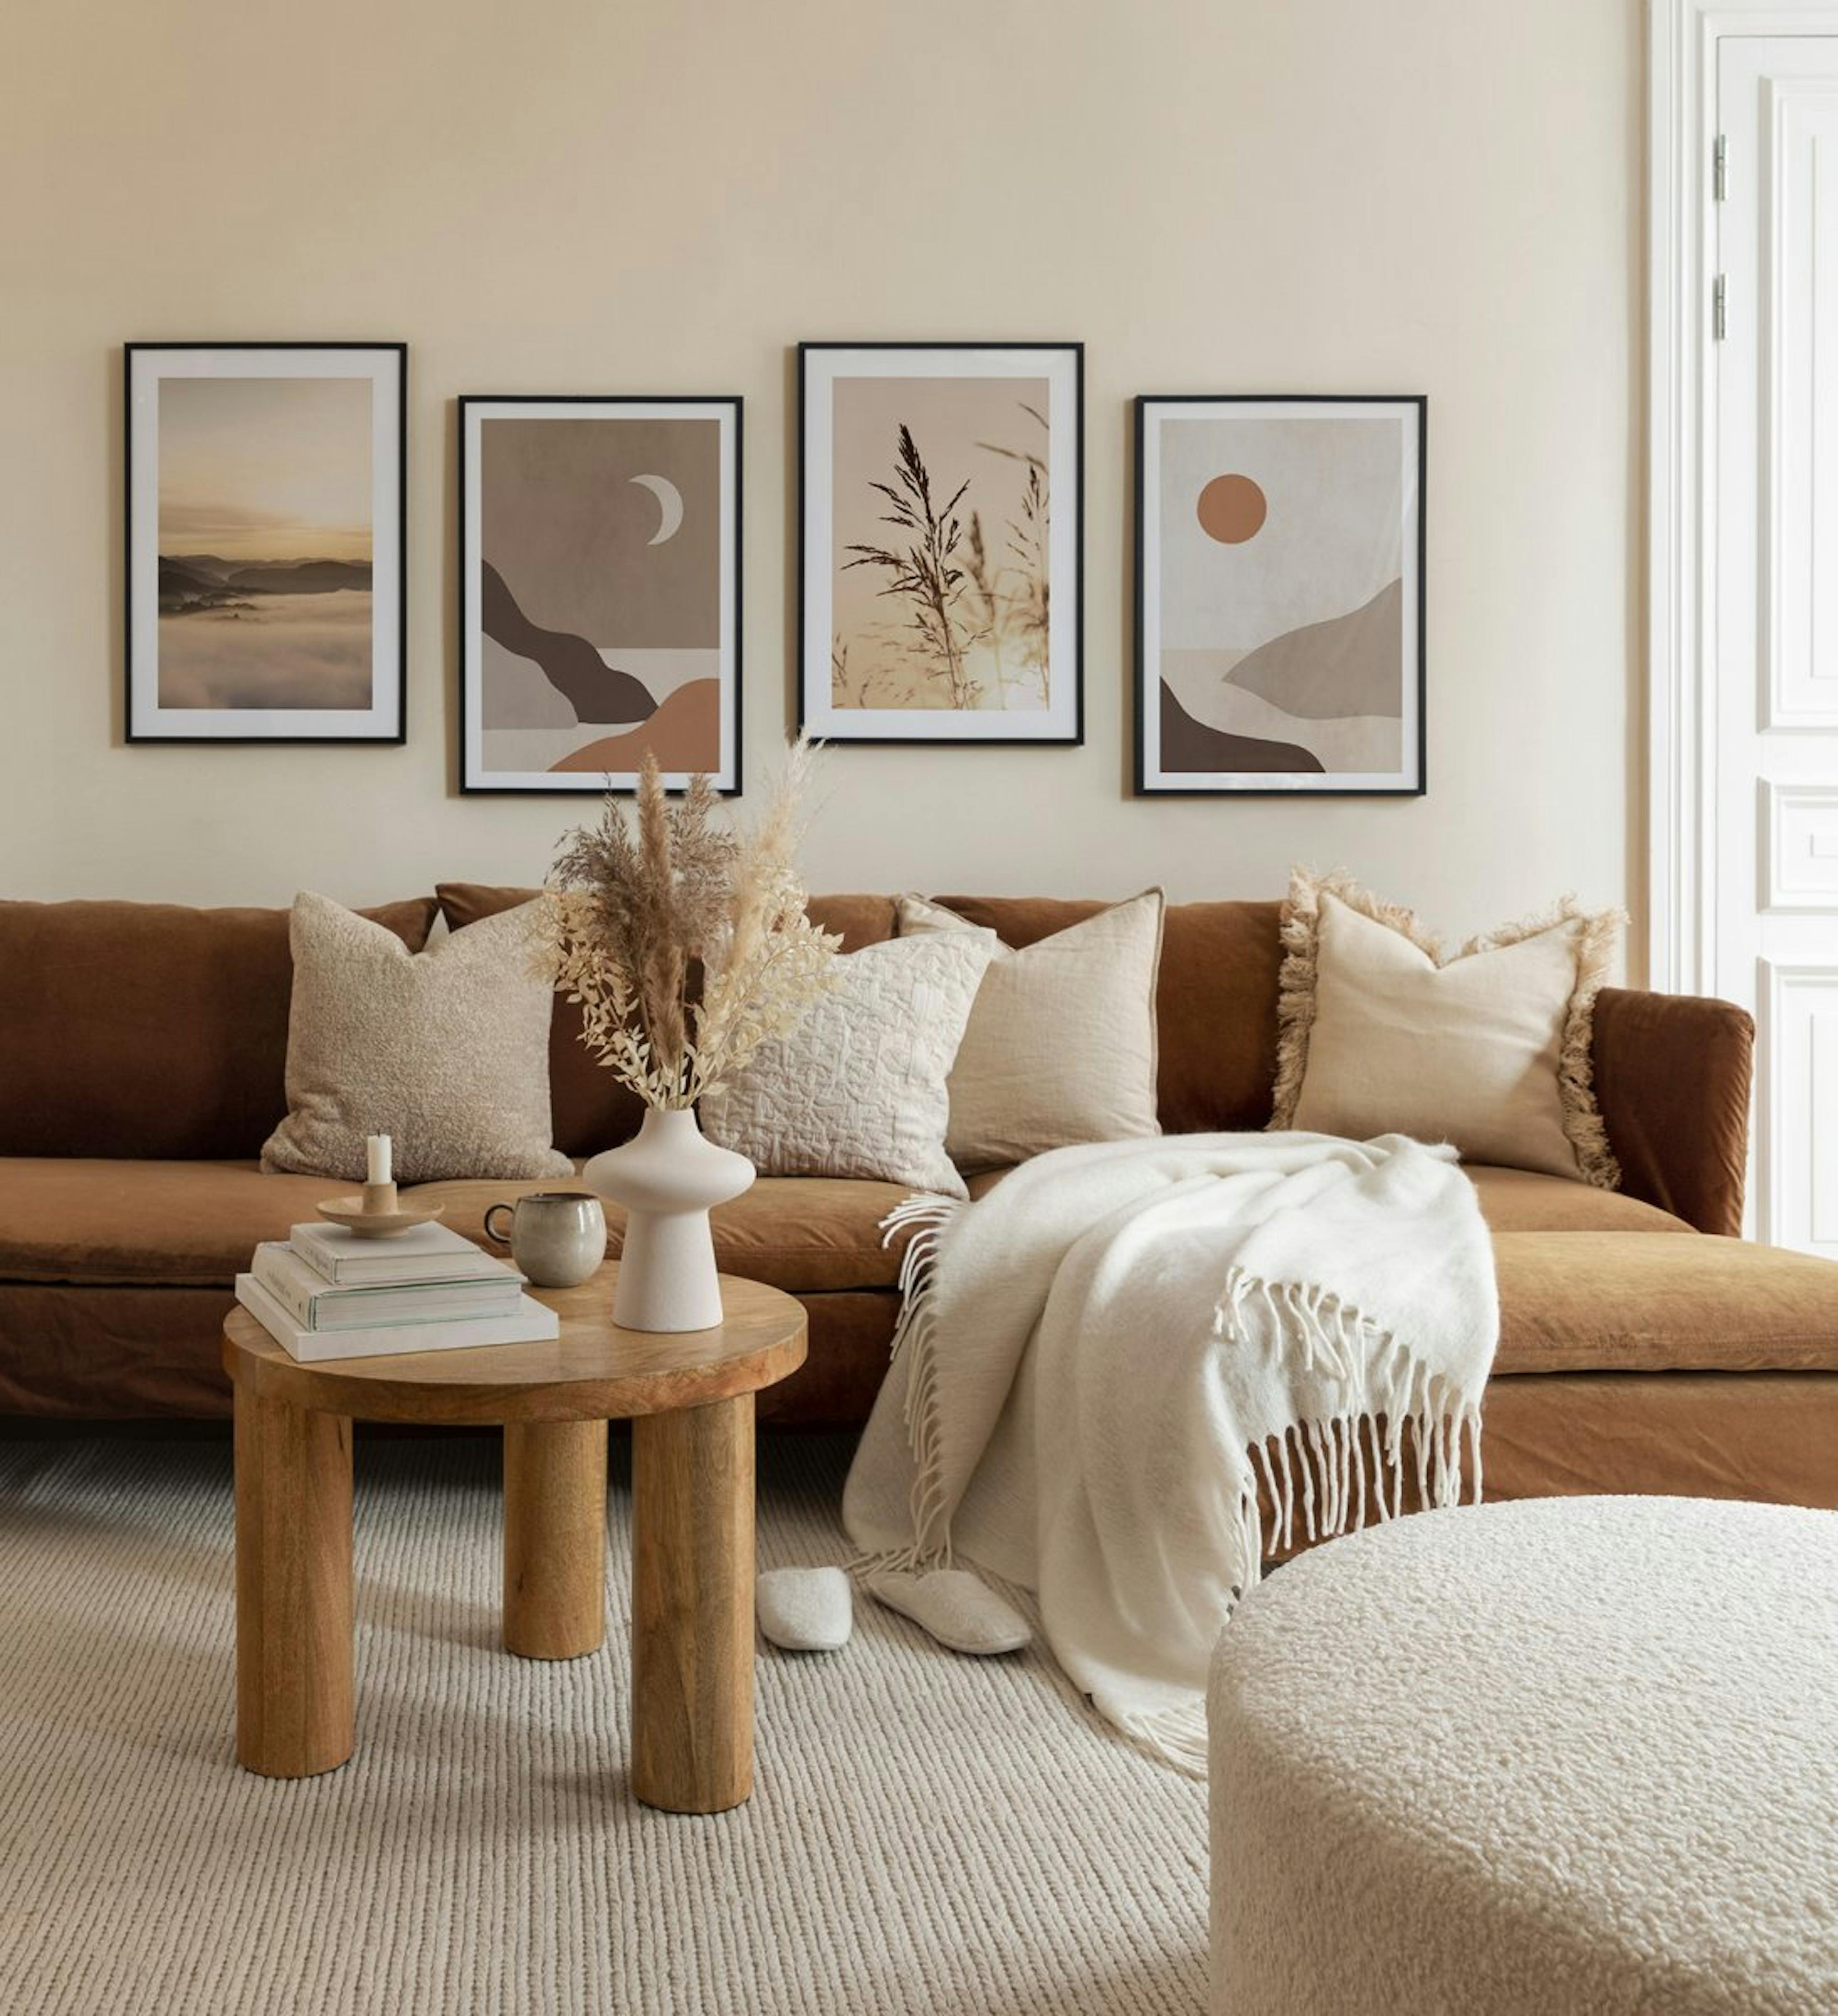 Serene gallery wall in brown and beige tones with landscape prints along with dark wood frames for living room